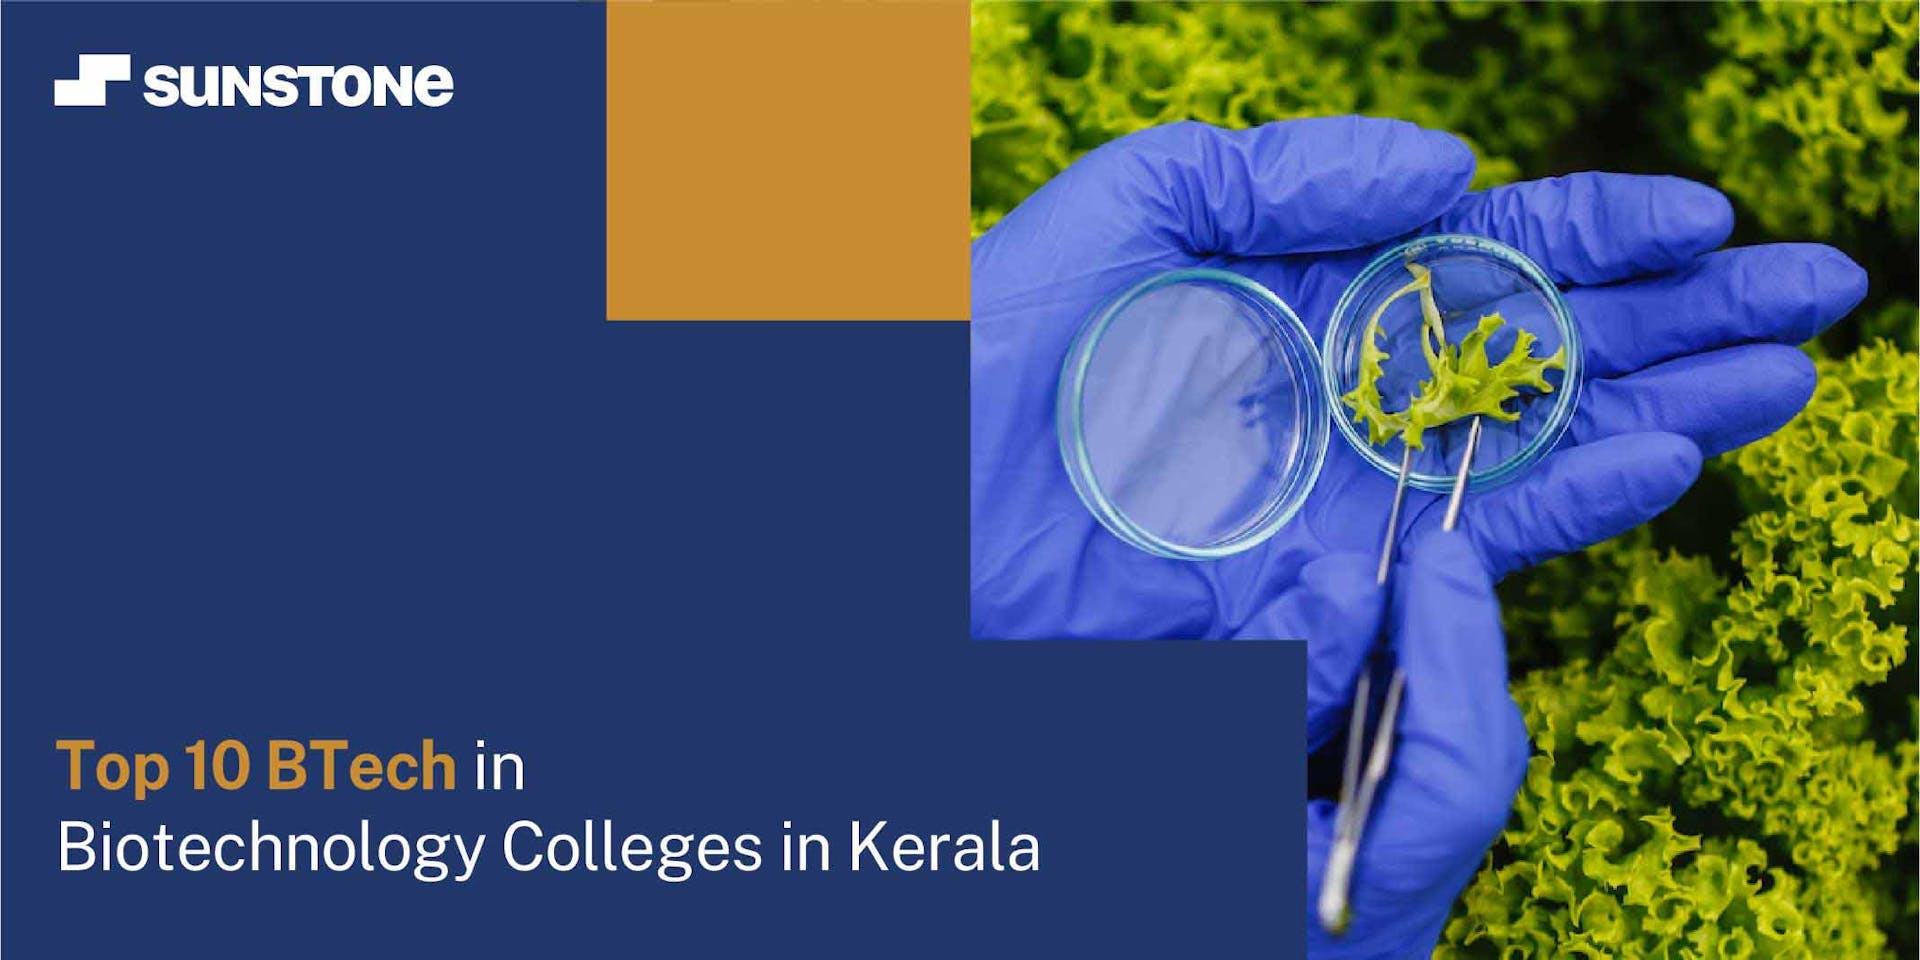 Top 10 BTech in Biotechnology Colleges in Kerala